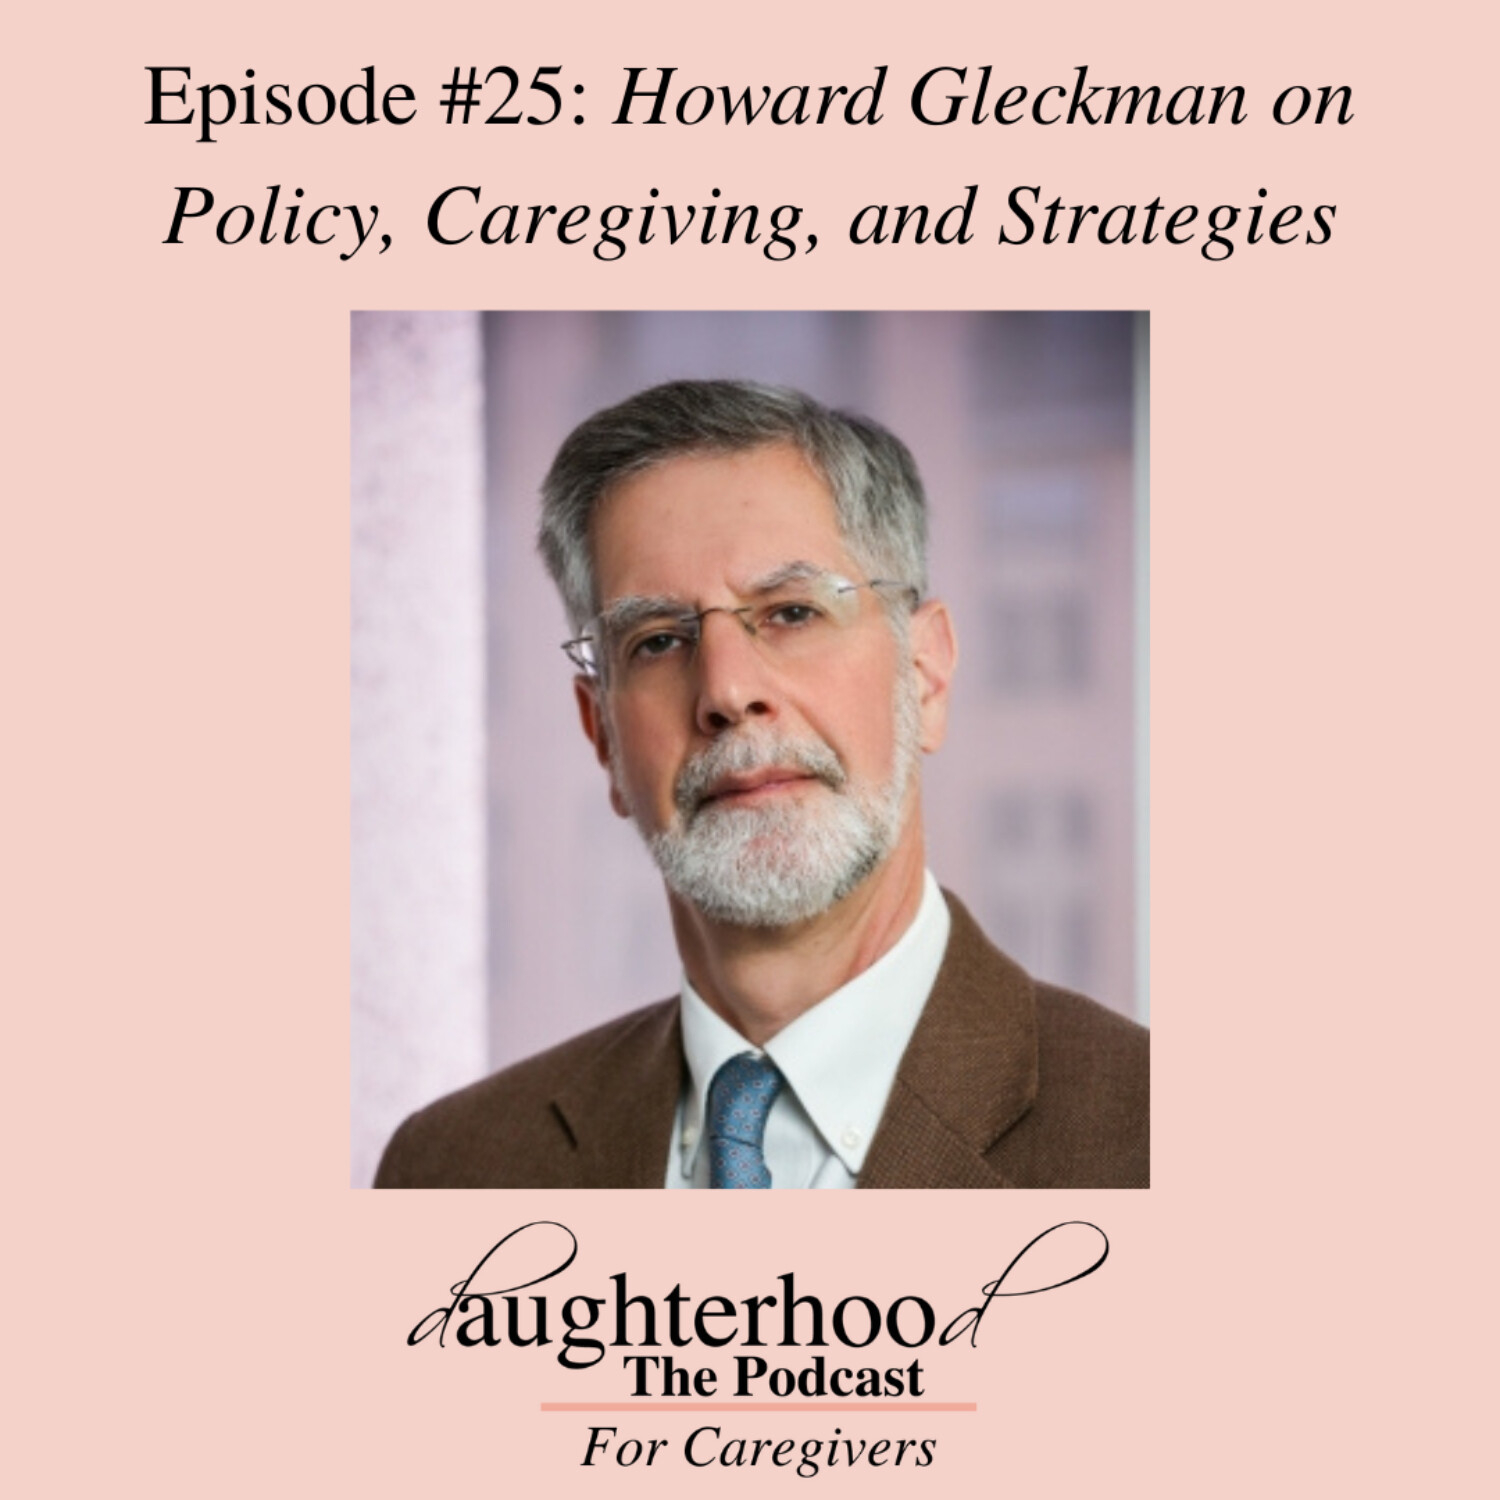 Howard Gleckman on Policy, Caregiving and Strategies